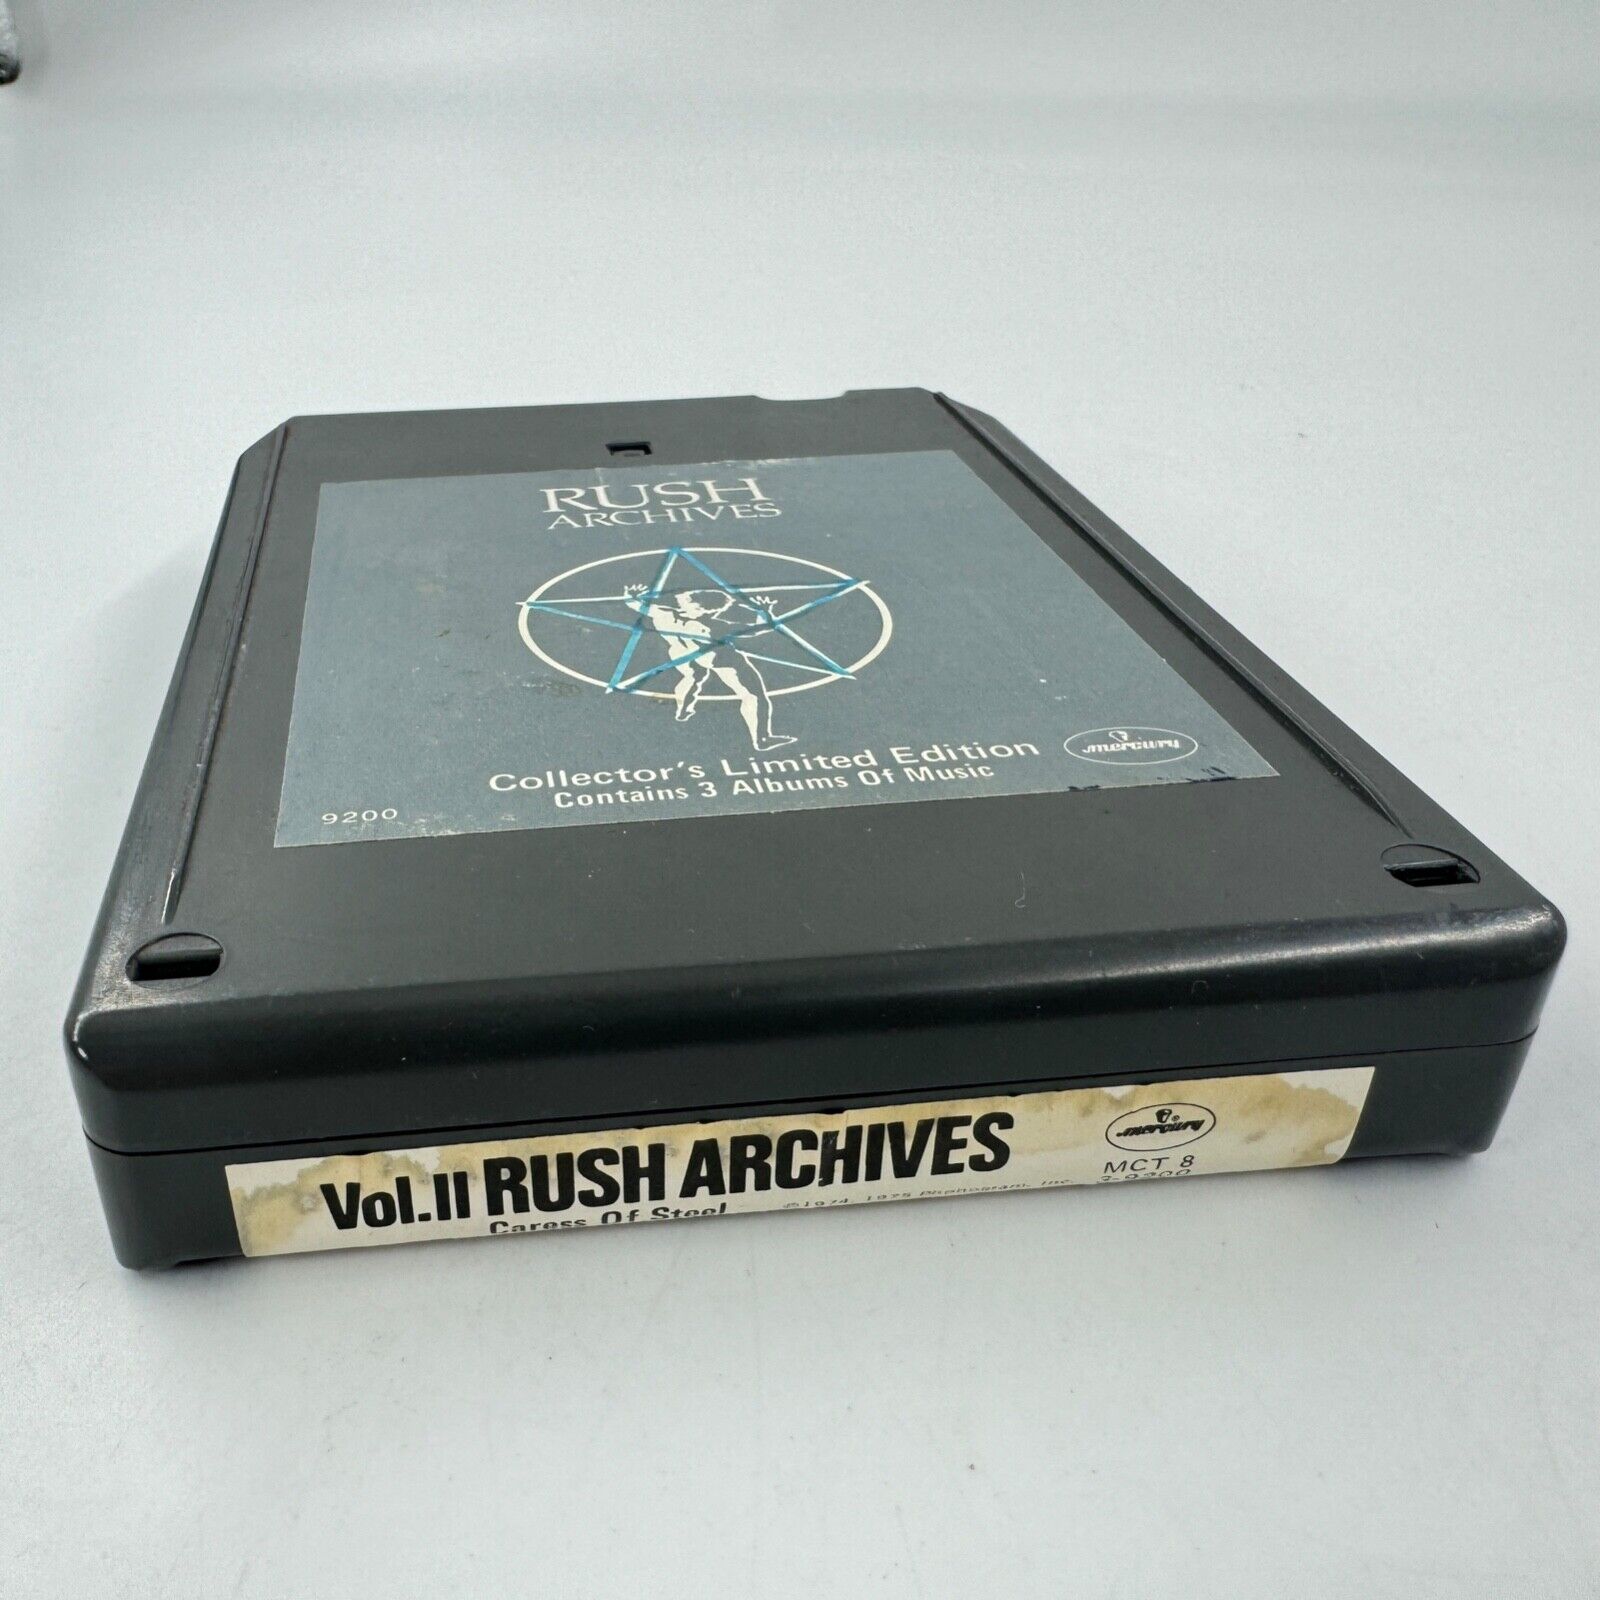 RUSH – Rush Archives VOL 2 (Caress of Steel) 1978 8-Track Tape. VG+ condition.